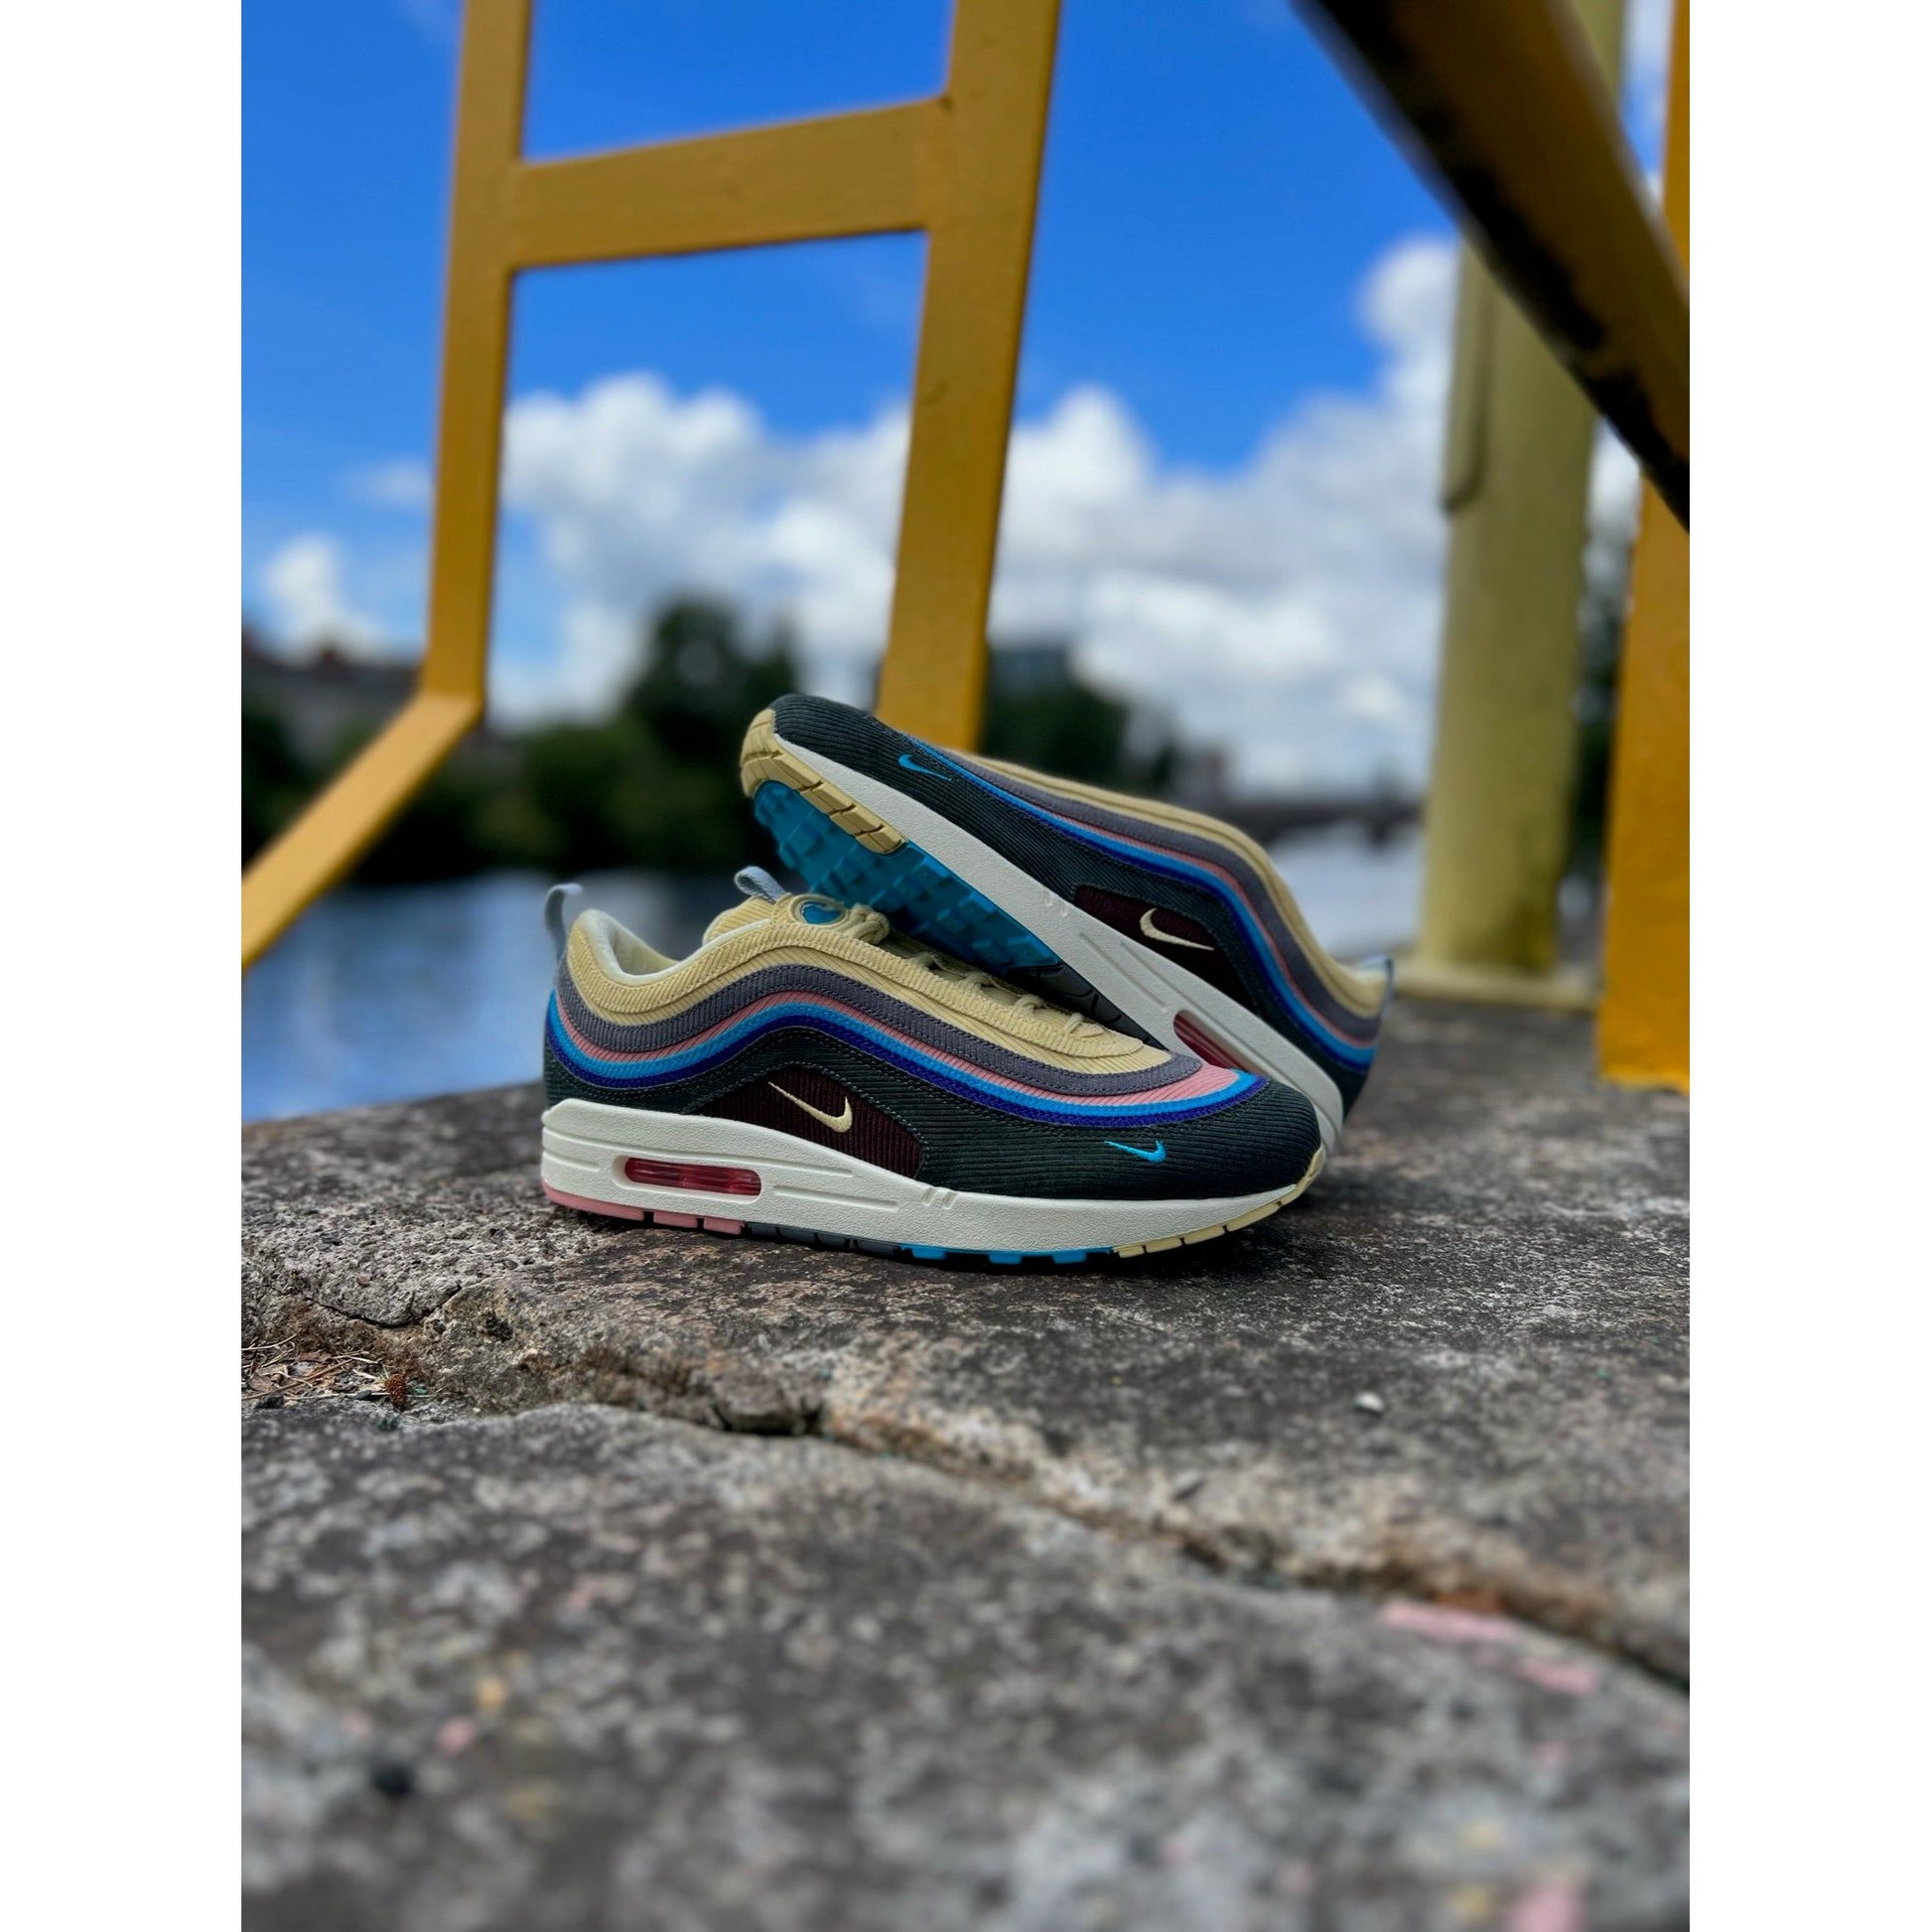 Nike Air Max 1/97 Sean Wotherspoon from Nike